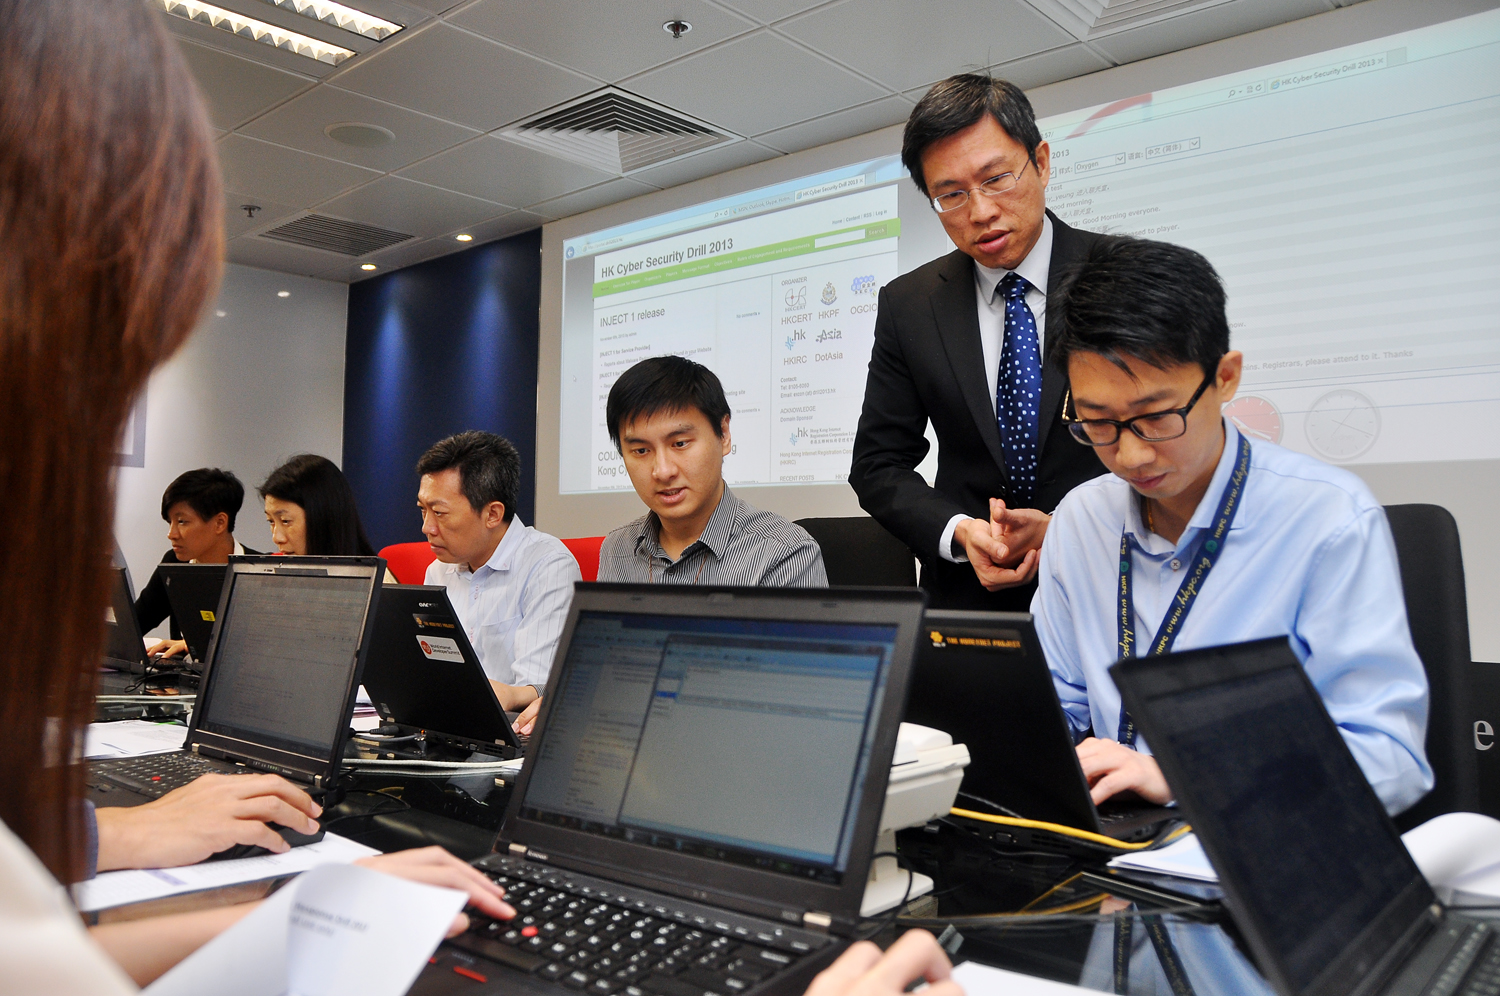 HKCERT conducts a territory-wide drill to strengthen the preparedness of local internet service providers and mobile network operators to handle targeted attacks